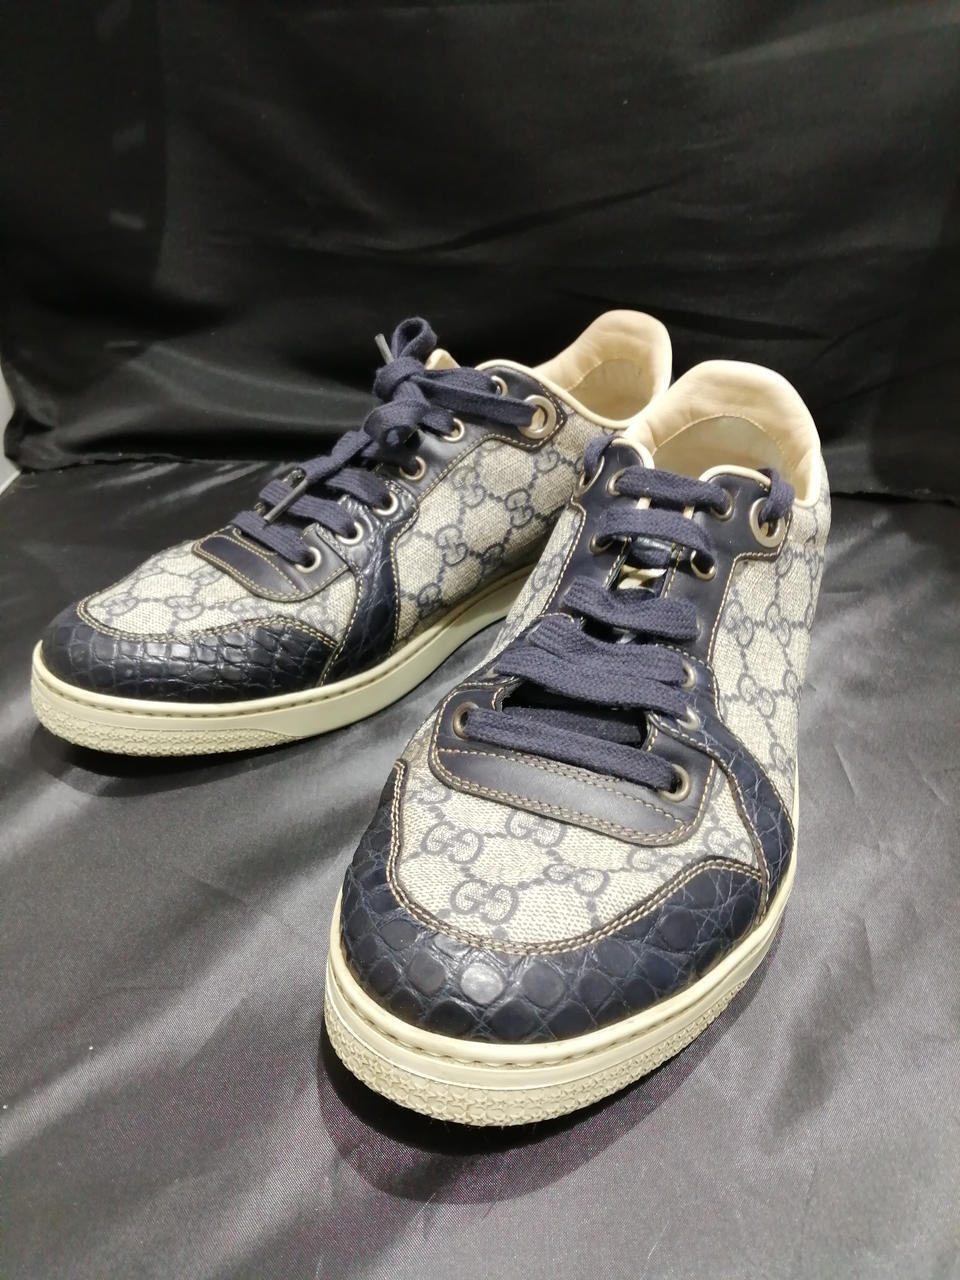 BEST OFFER GUCCI sneakers 283117 71/2 US:71/2 from Japan '039